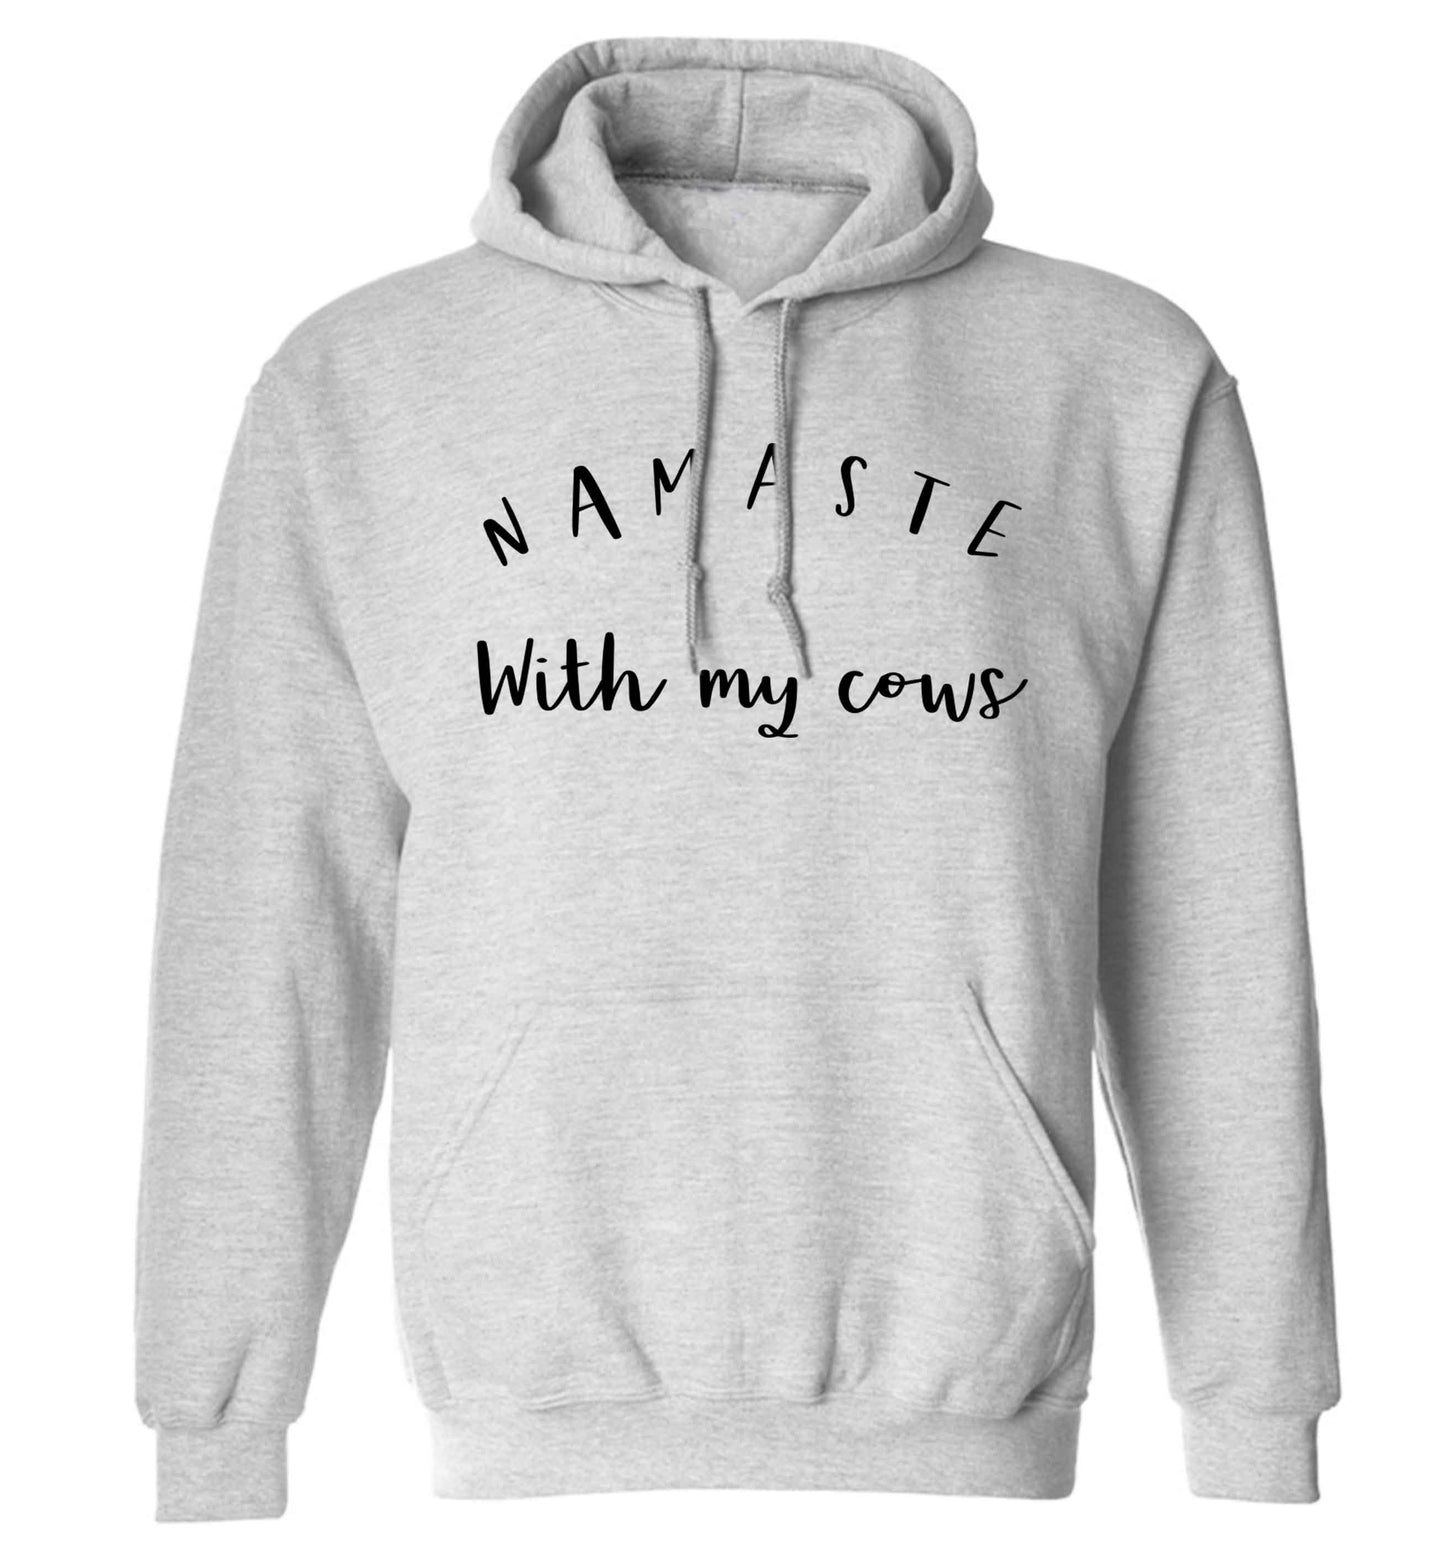 Namaste with my cows adults unisex grey hoodie 2XL